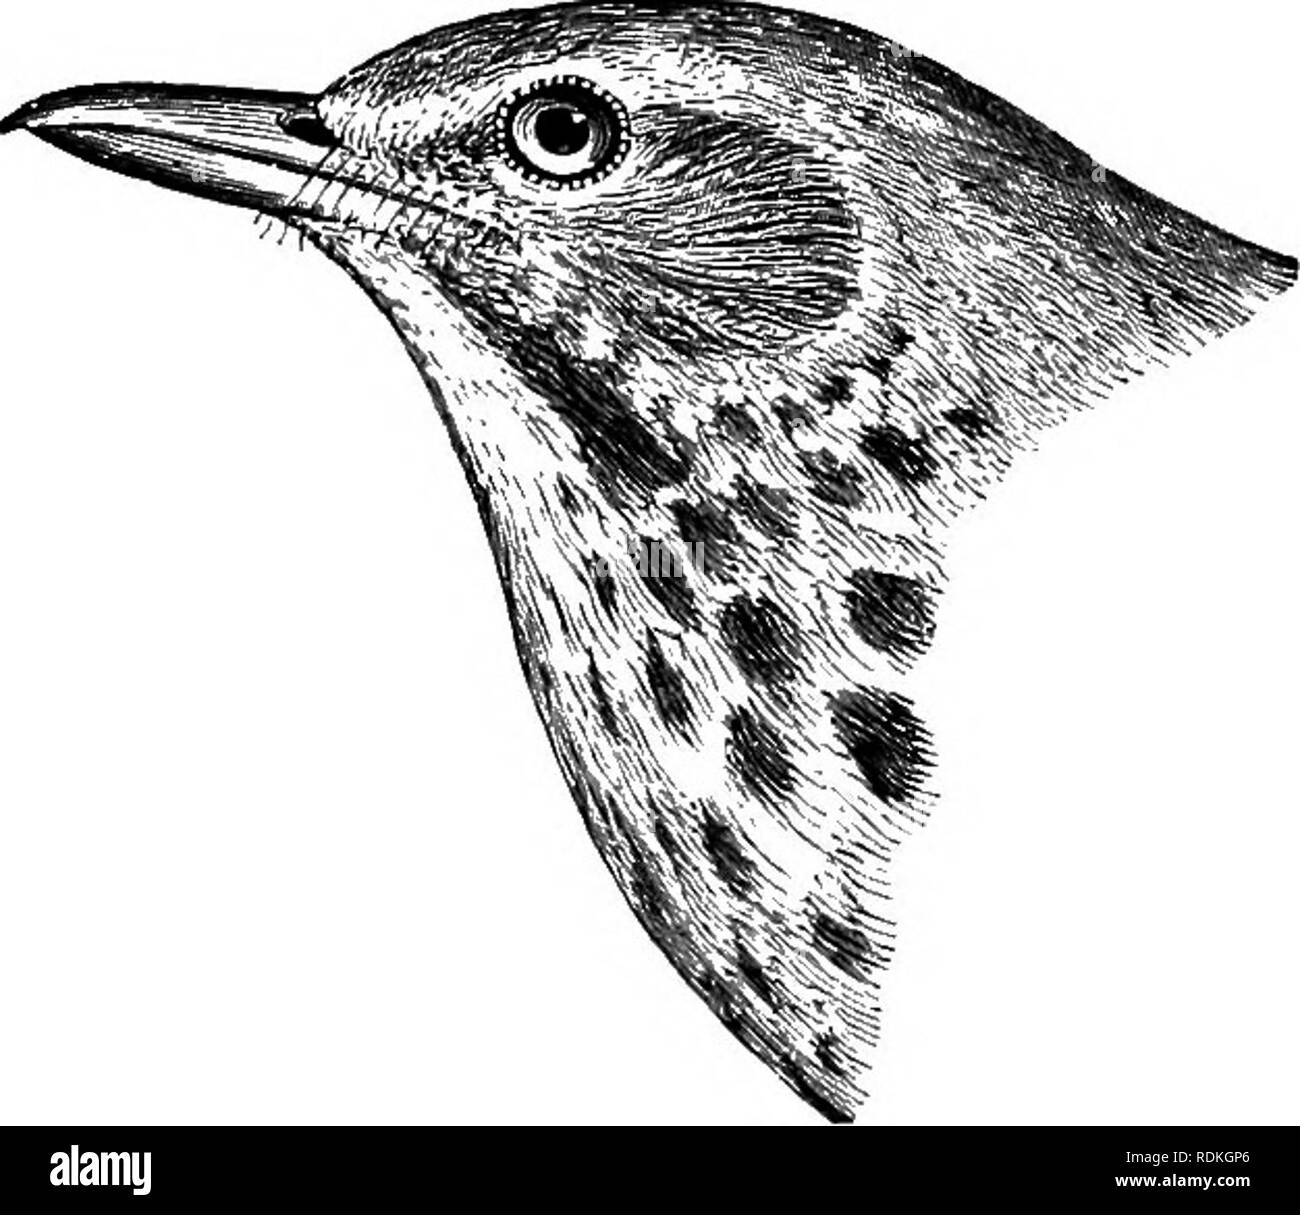 . The birds of Illinois and Wisconsin. Birds; Birds. Jan., 1909. Birds of Illinois and Wisconsin—Cory. 707 Subfamily TURDIN^E. Thrushes. Genus HYLOCICHLA Baird. 359. Hylocichla mustelina (Gmel.)- Wood Thrush. Turdus mustelinus Gmel., A. 0. U. Check List, 1895, p. 316. Distr.: Eastern temperate North America, west to the Great Plains and north to Ontario, Michigan, and Wisconsin; south in winter to Cuba and in Middle America to Guatemala; breeds from northern Florida and the Gulf states northward. Adult: Top of head, bright tawny cinnamon brown, shading to olive brown on the back and brownish o Stock Photo